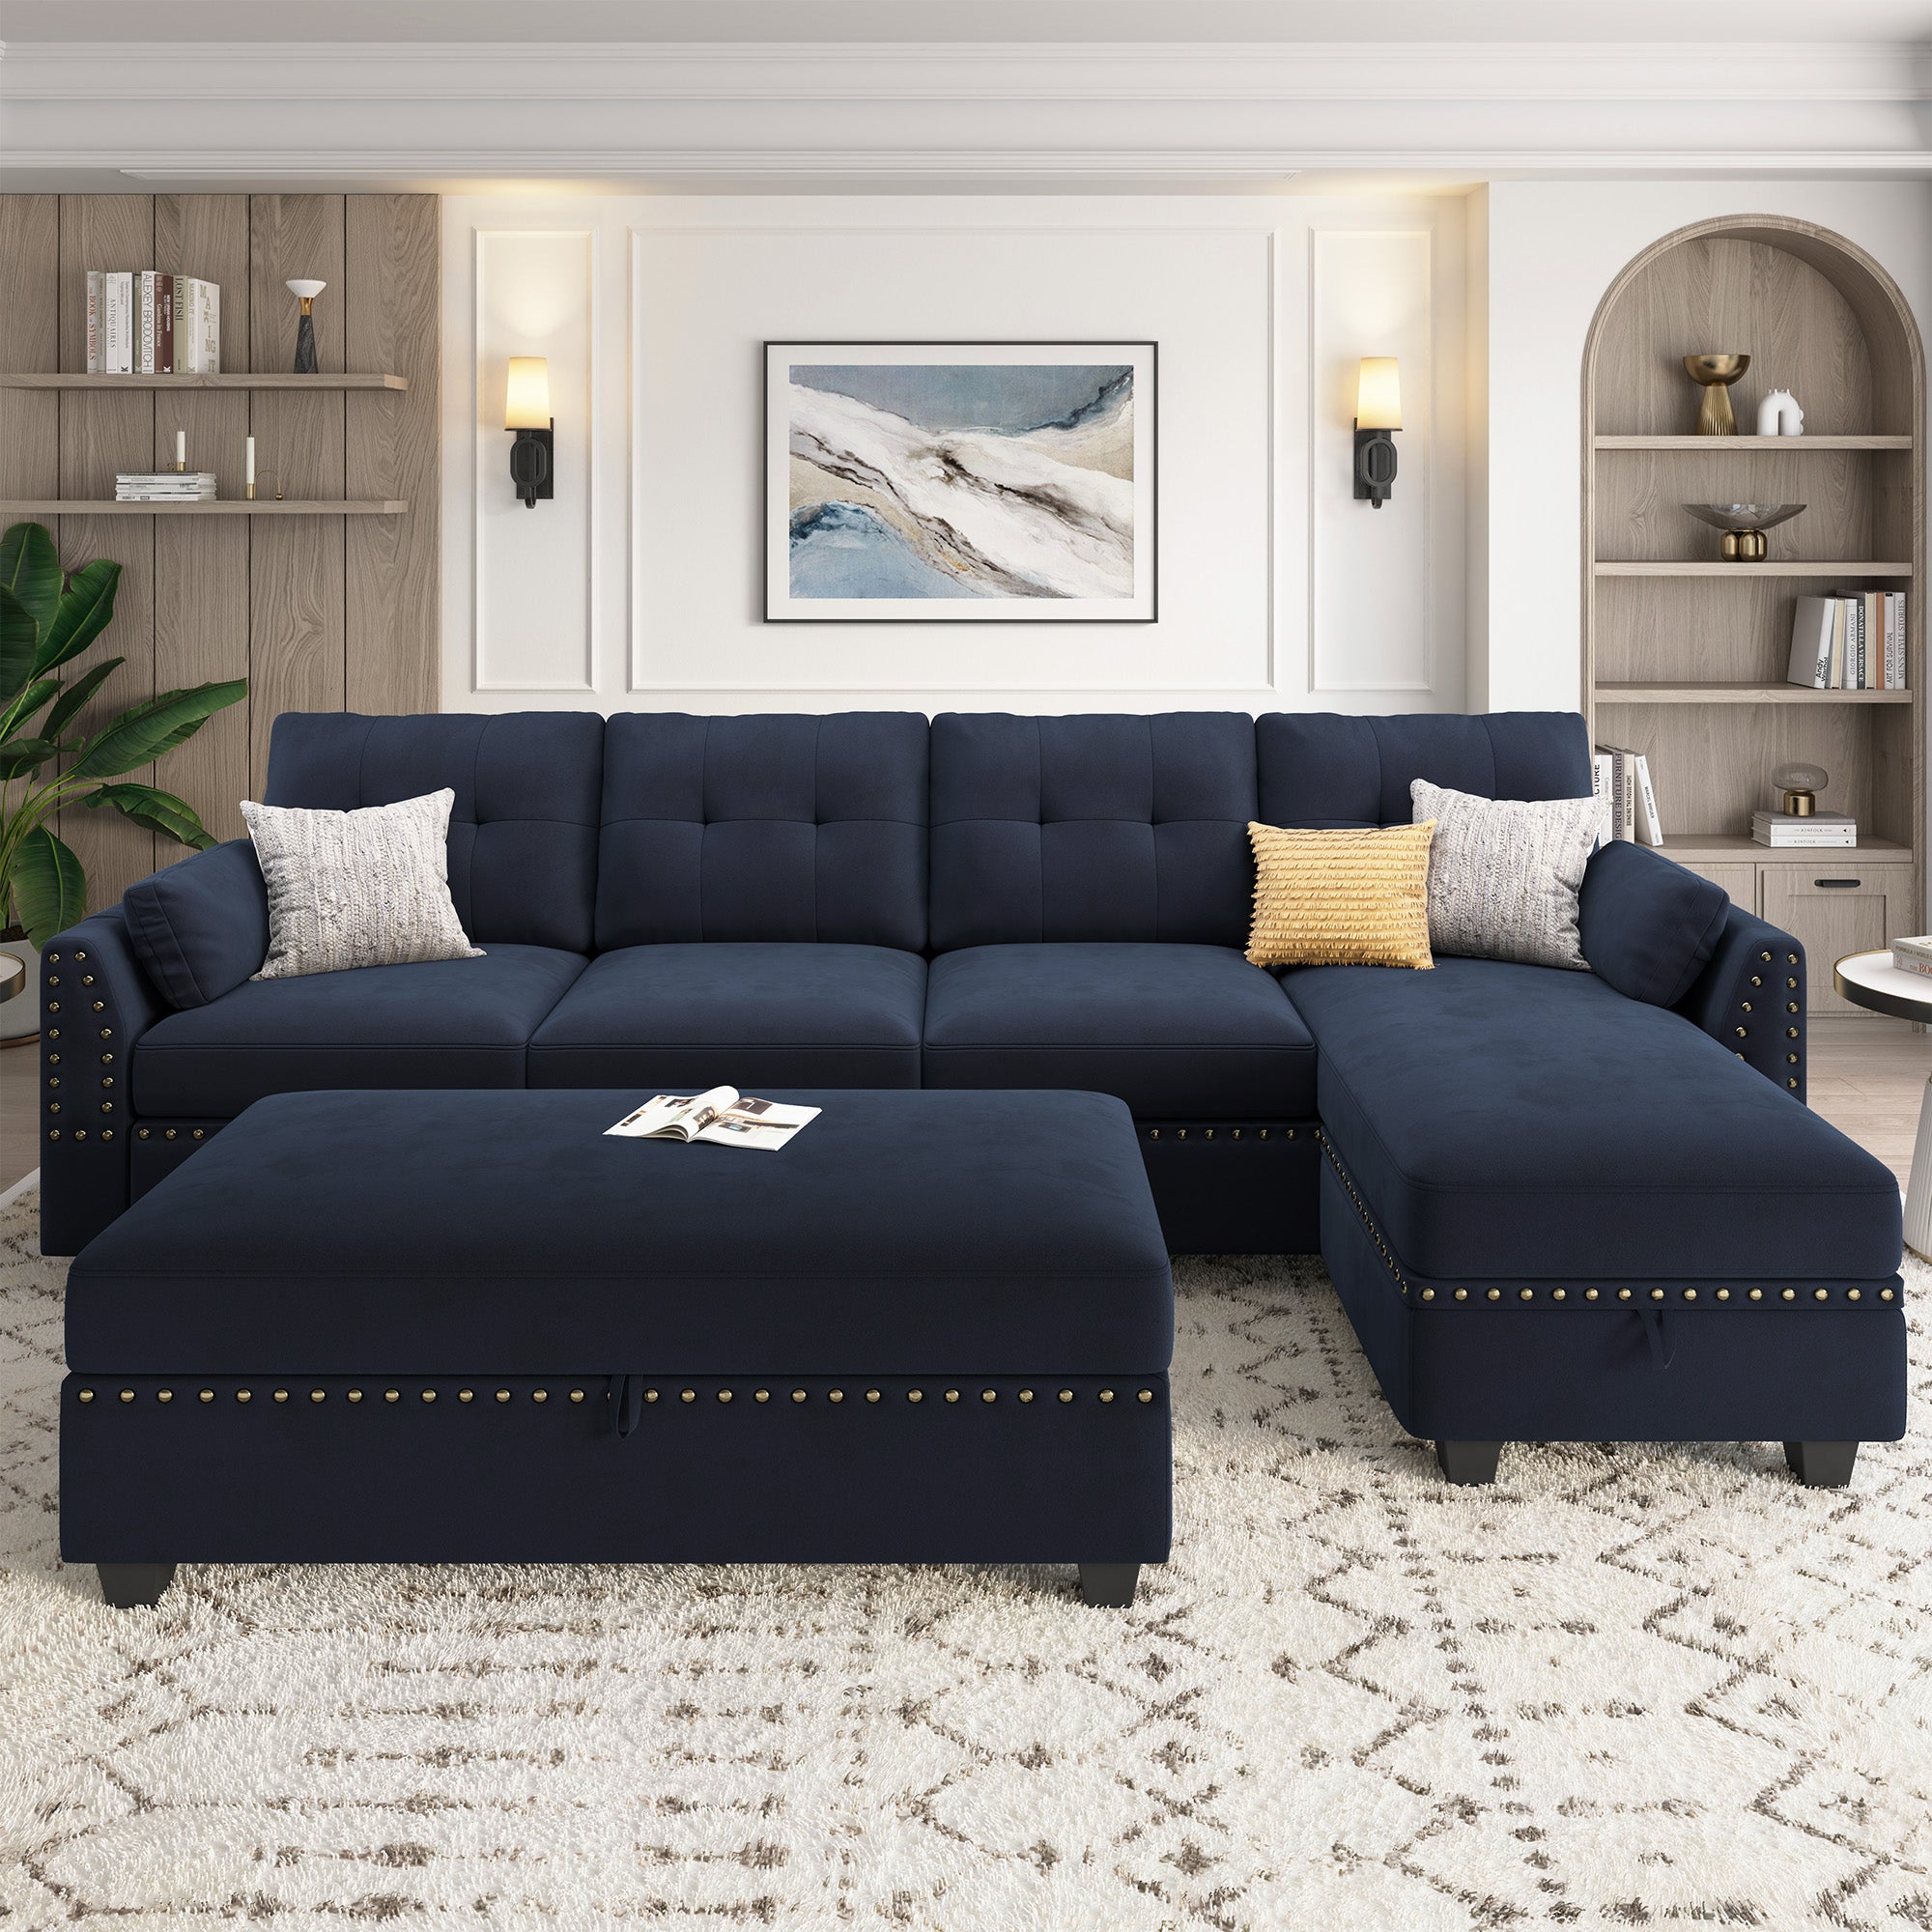 HONBAY Velvet 4-Seat L-Shaped Sectional Sofa with Storage Ottoman